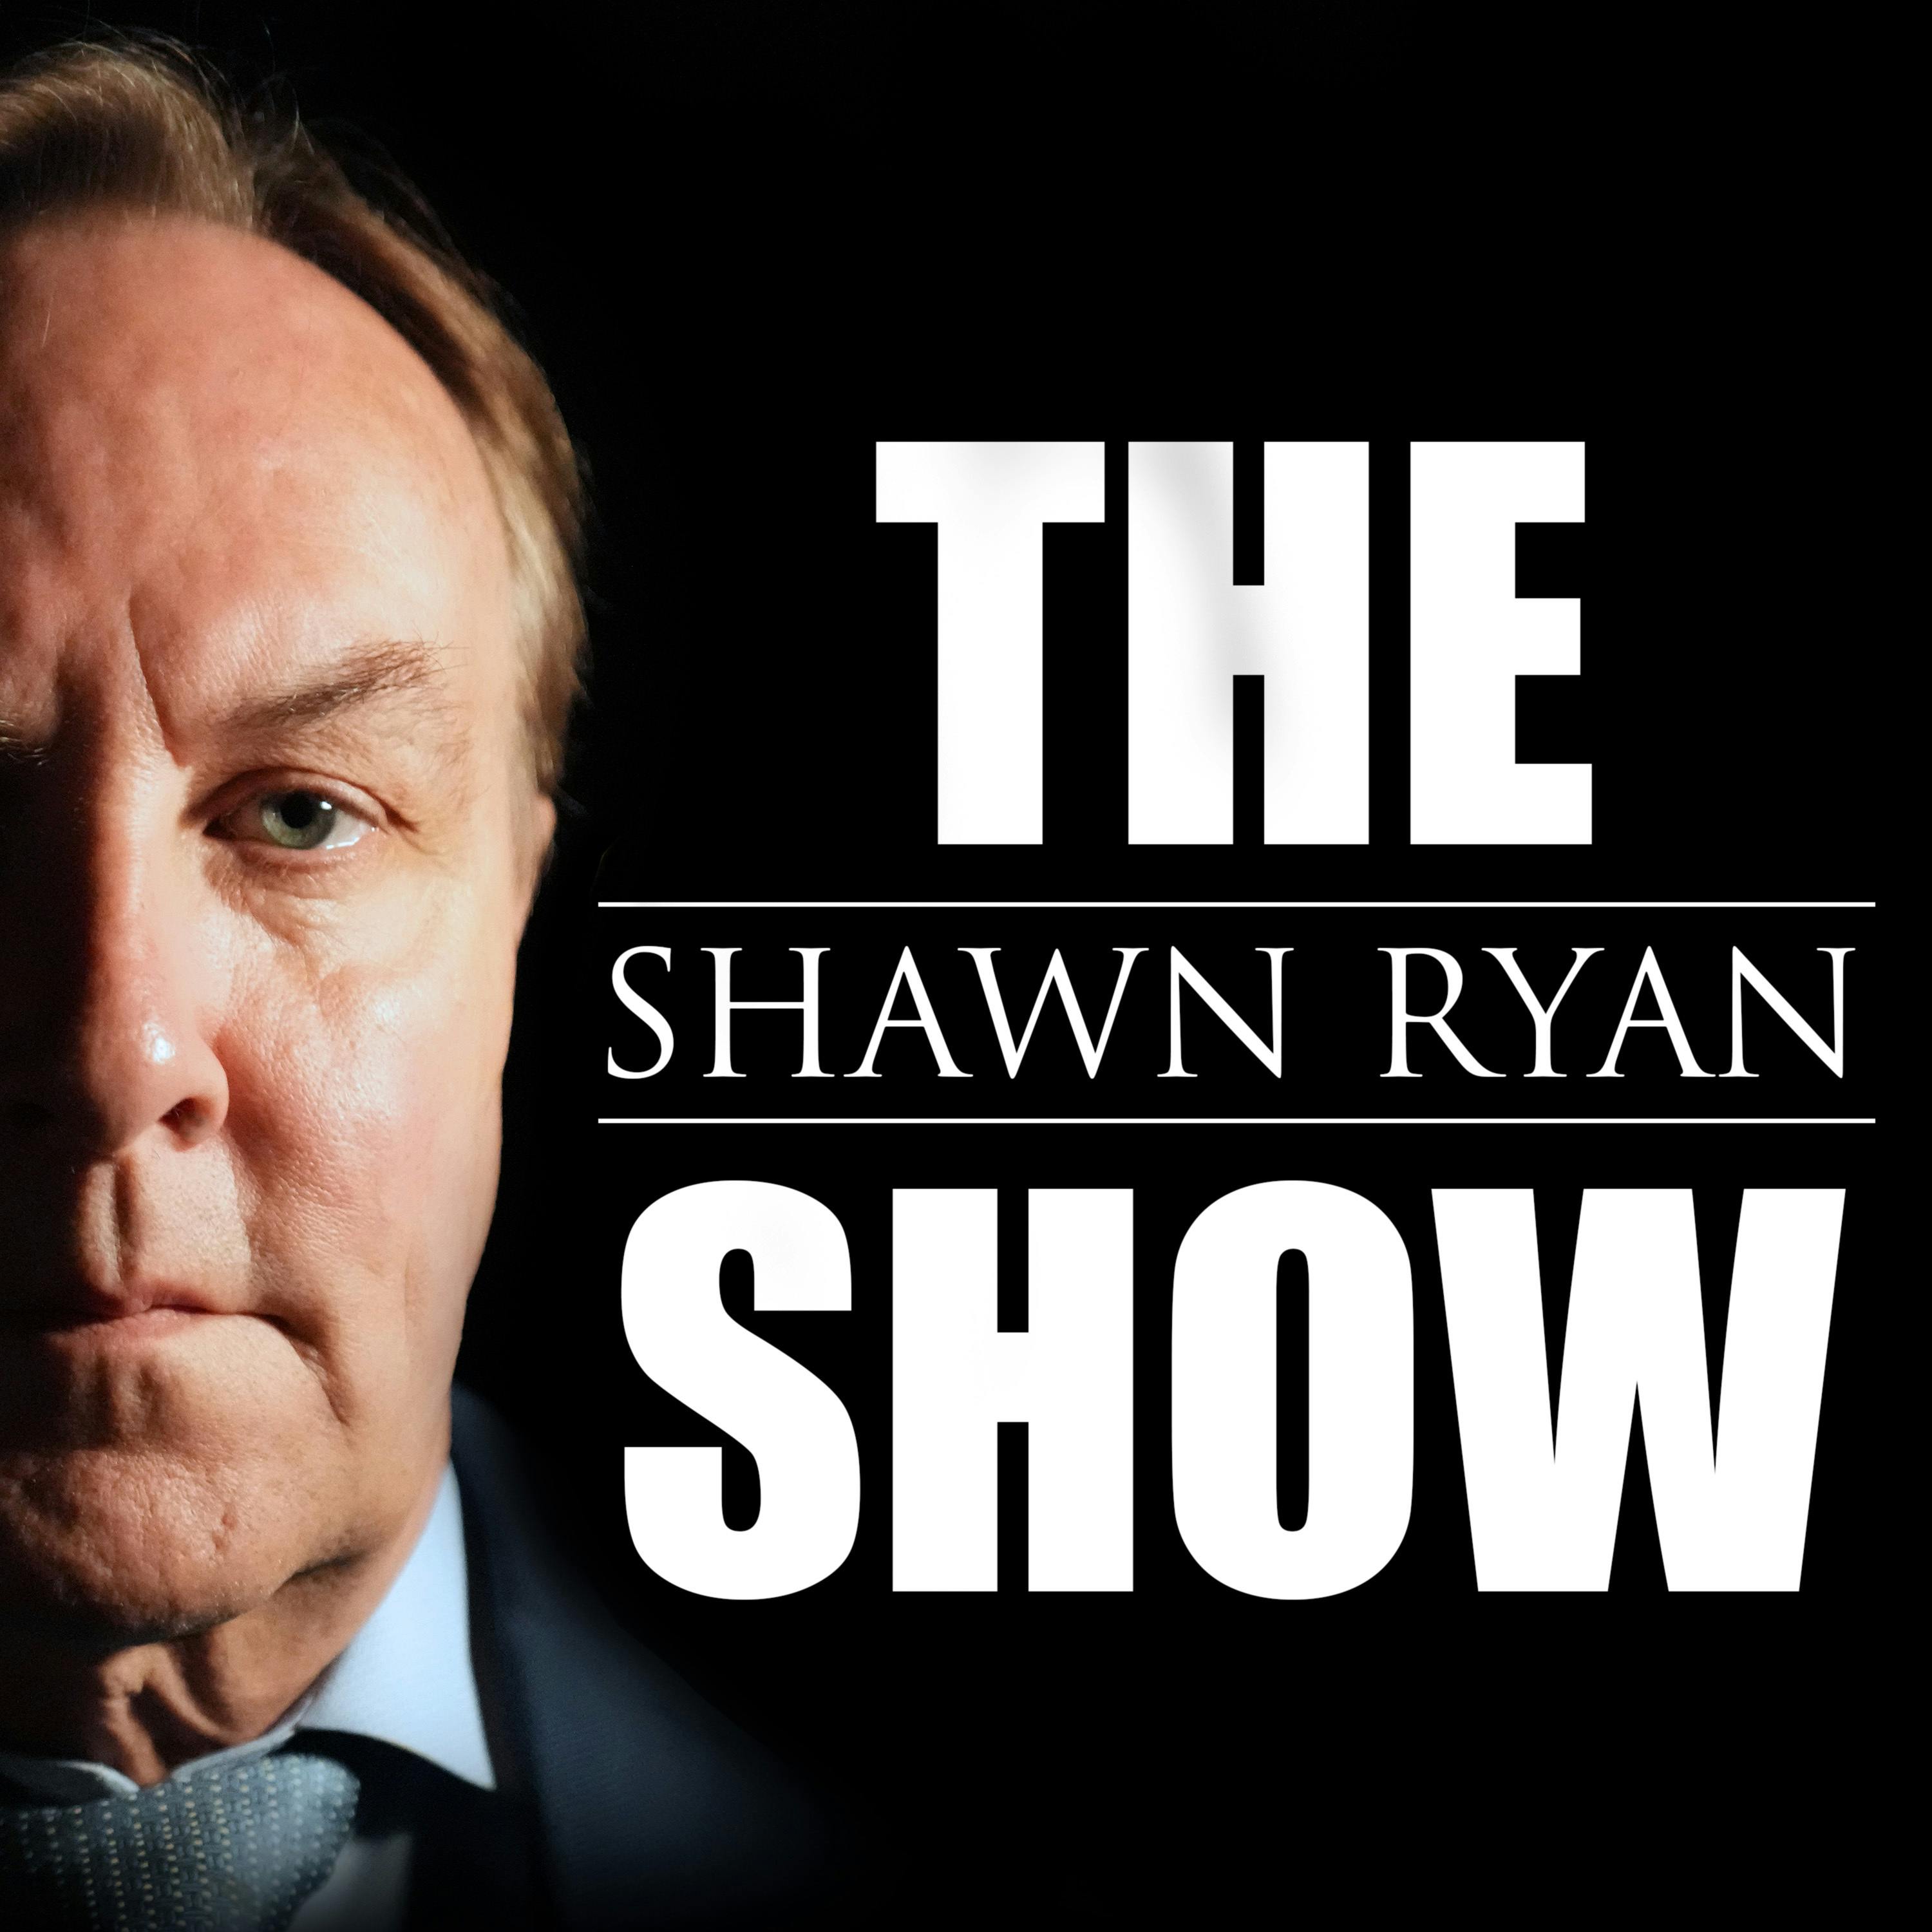 #60 David Tice - The Power Grid Blackout / America's WORST Enemy Could Attack Any Moment by Shawn Ryan | Cumulus Podcast Network